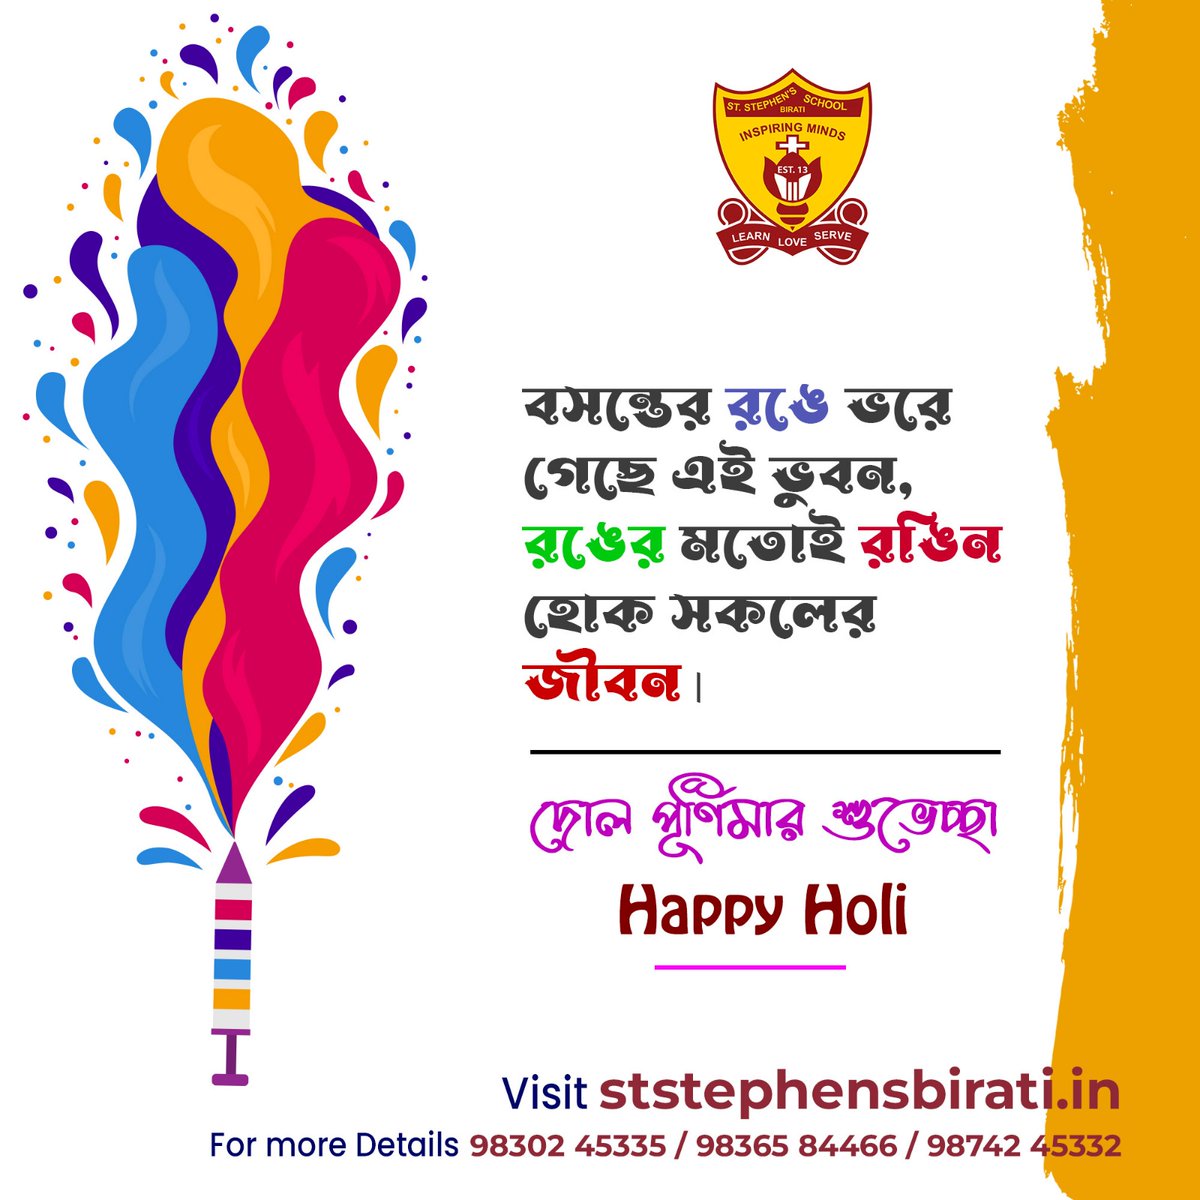 Let Your Holi be Filled with Happiness and Prosperity. 𝐇𝐚𝐩𝐩𝐲 𝐇𝐨𝐥𝐢! #StStephensSchool #StStephensSchoolBirati #Holi #Holi2024 #DolPurnima #DolPurnima2024 #DolYatra #DolYatra2024 #FestivalofColours